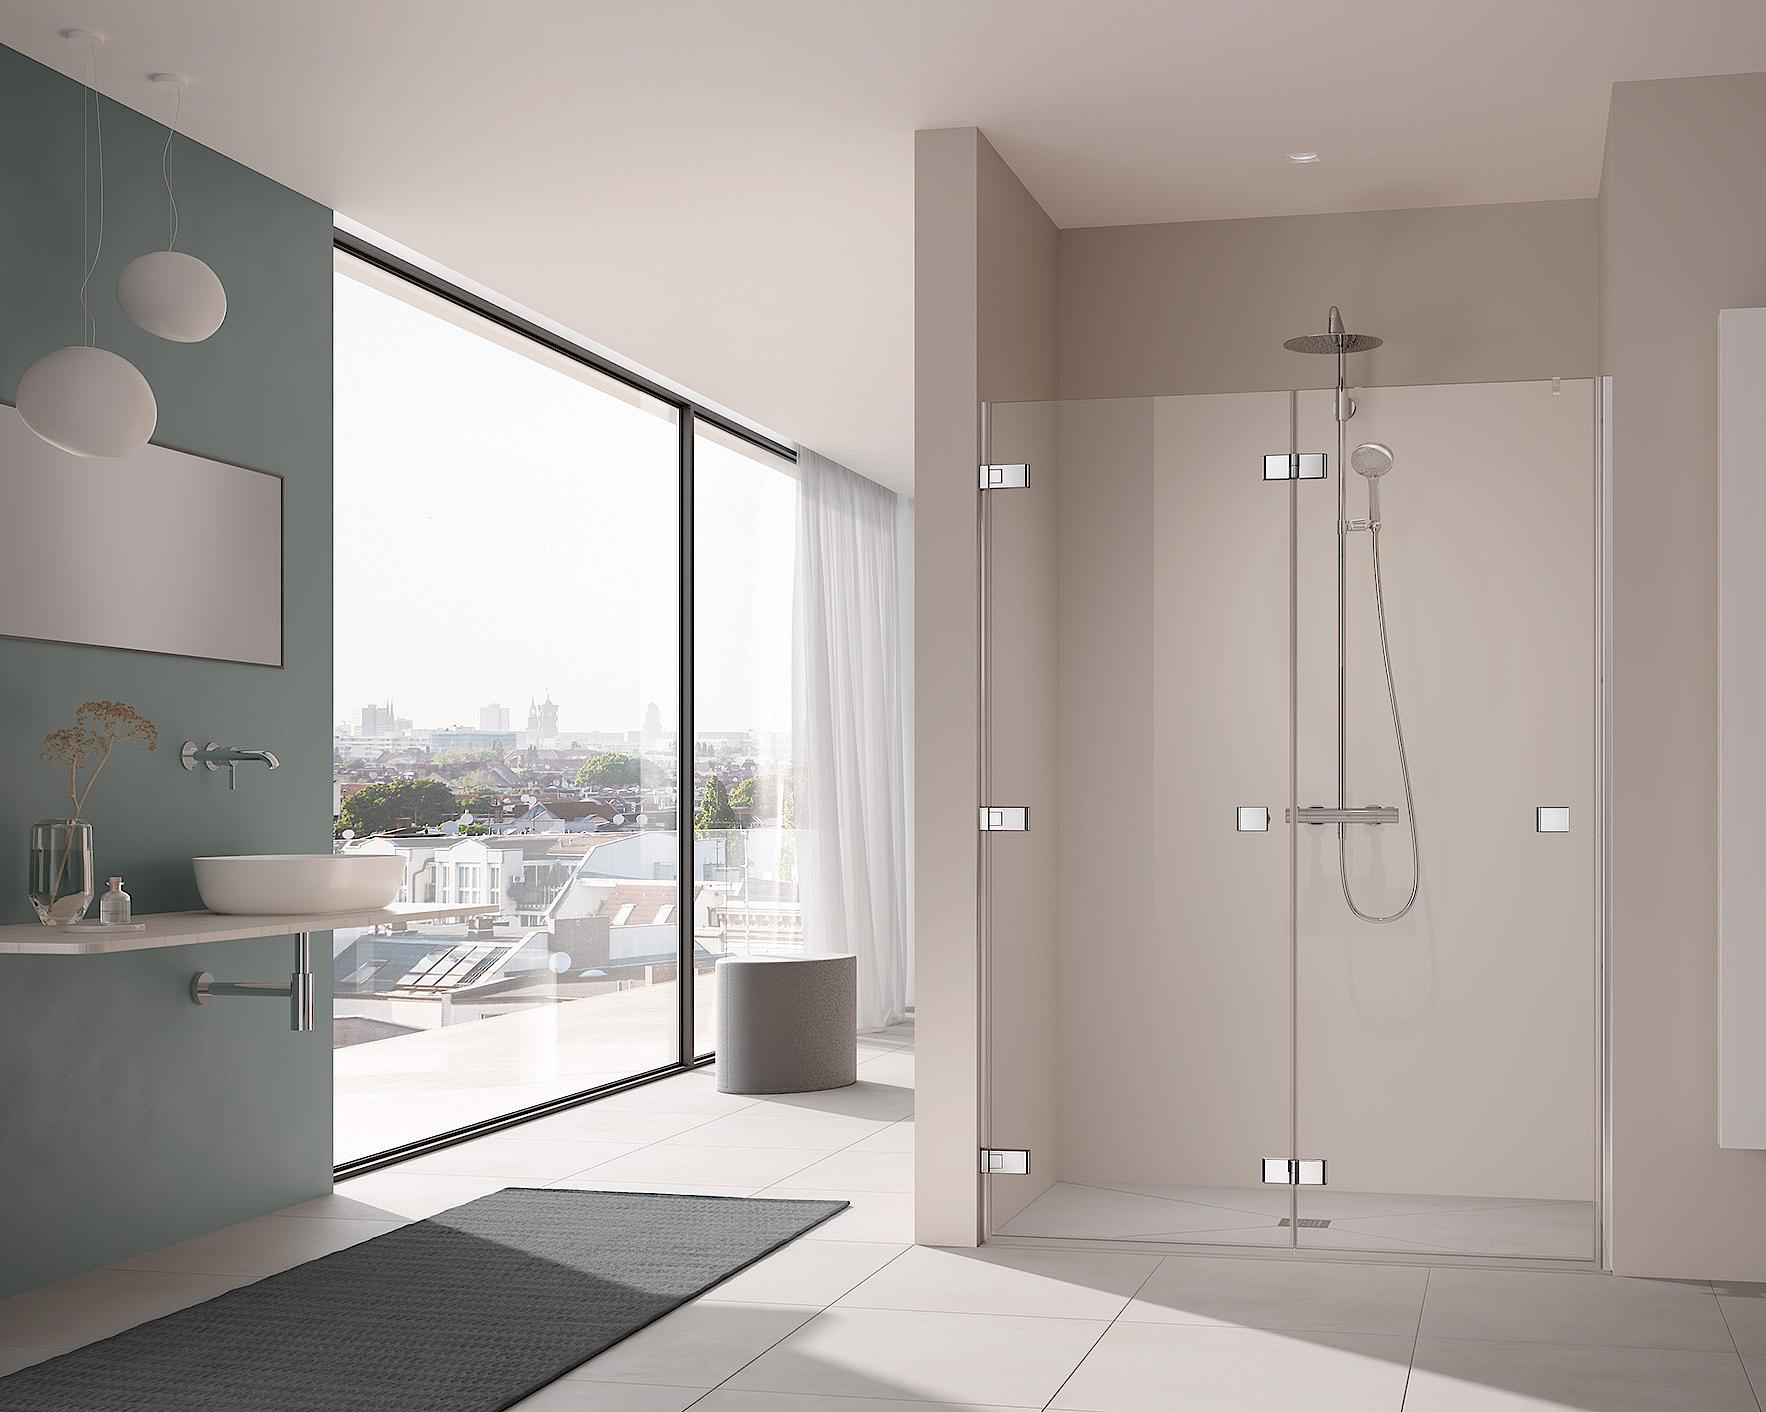 Kermi shower enclosure MENA single-panel folding door with 3rd wall hinge and additional handle